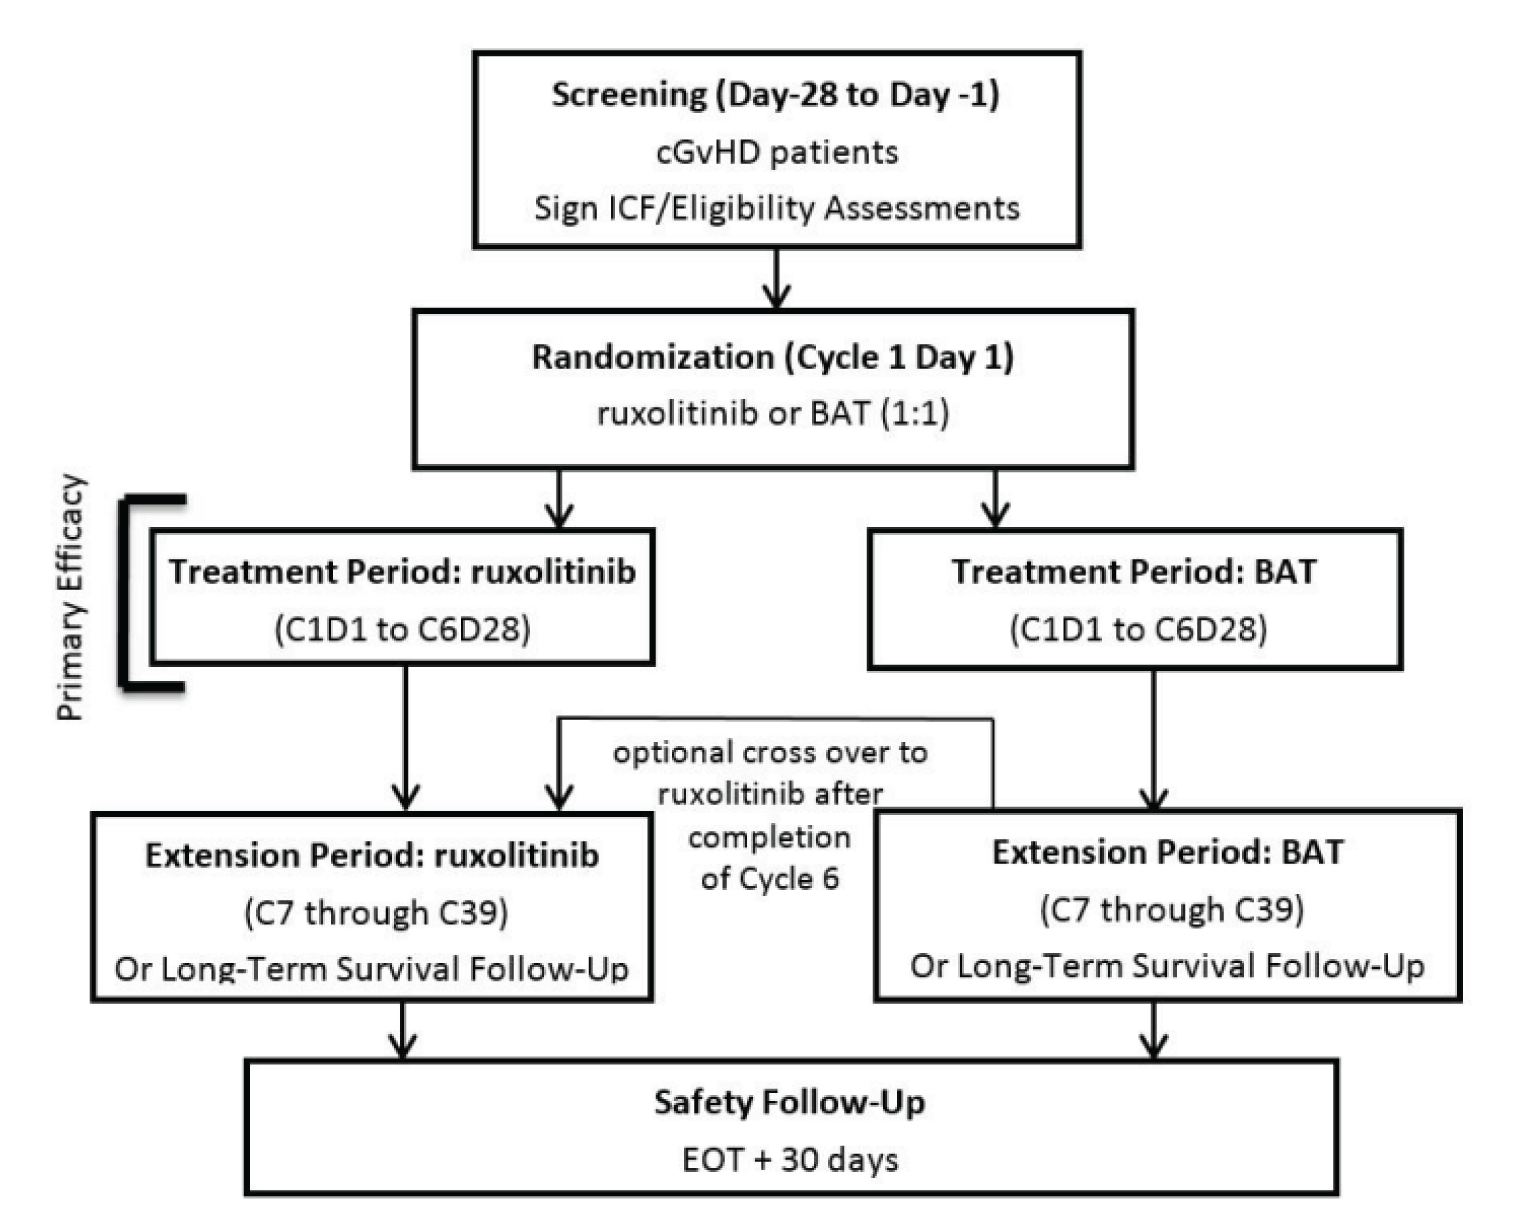 This figure shows that the study comprised 4 main periods: the screening period (28-day duration); main treatment period (day 1 until end of treatment; i.e., the primary efficacy period [cycle 1 to end of cycle 6] plus the extension period [cycle 7 to cycle 39]); long-term survival follow-up (end of treatment to 39 cycles on study treatment); and safety follow-up (end of treatment plus 30 days).